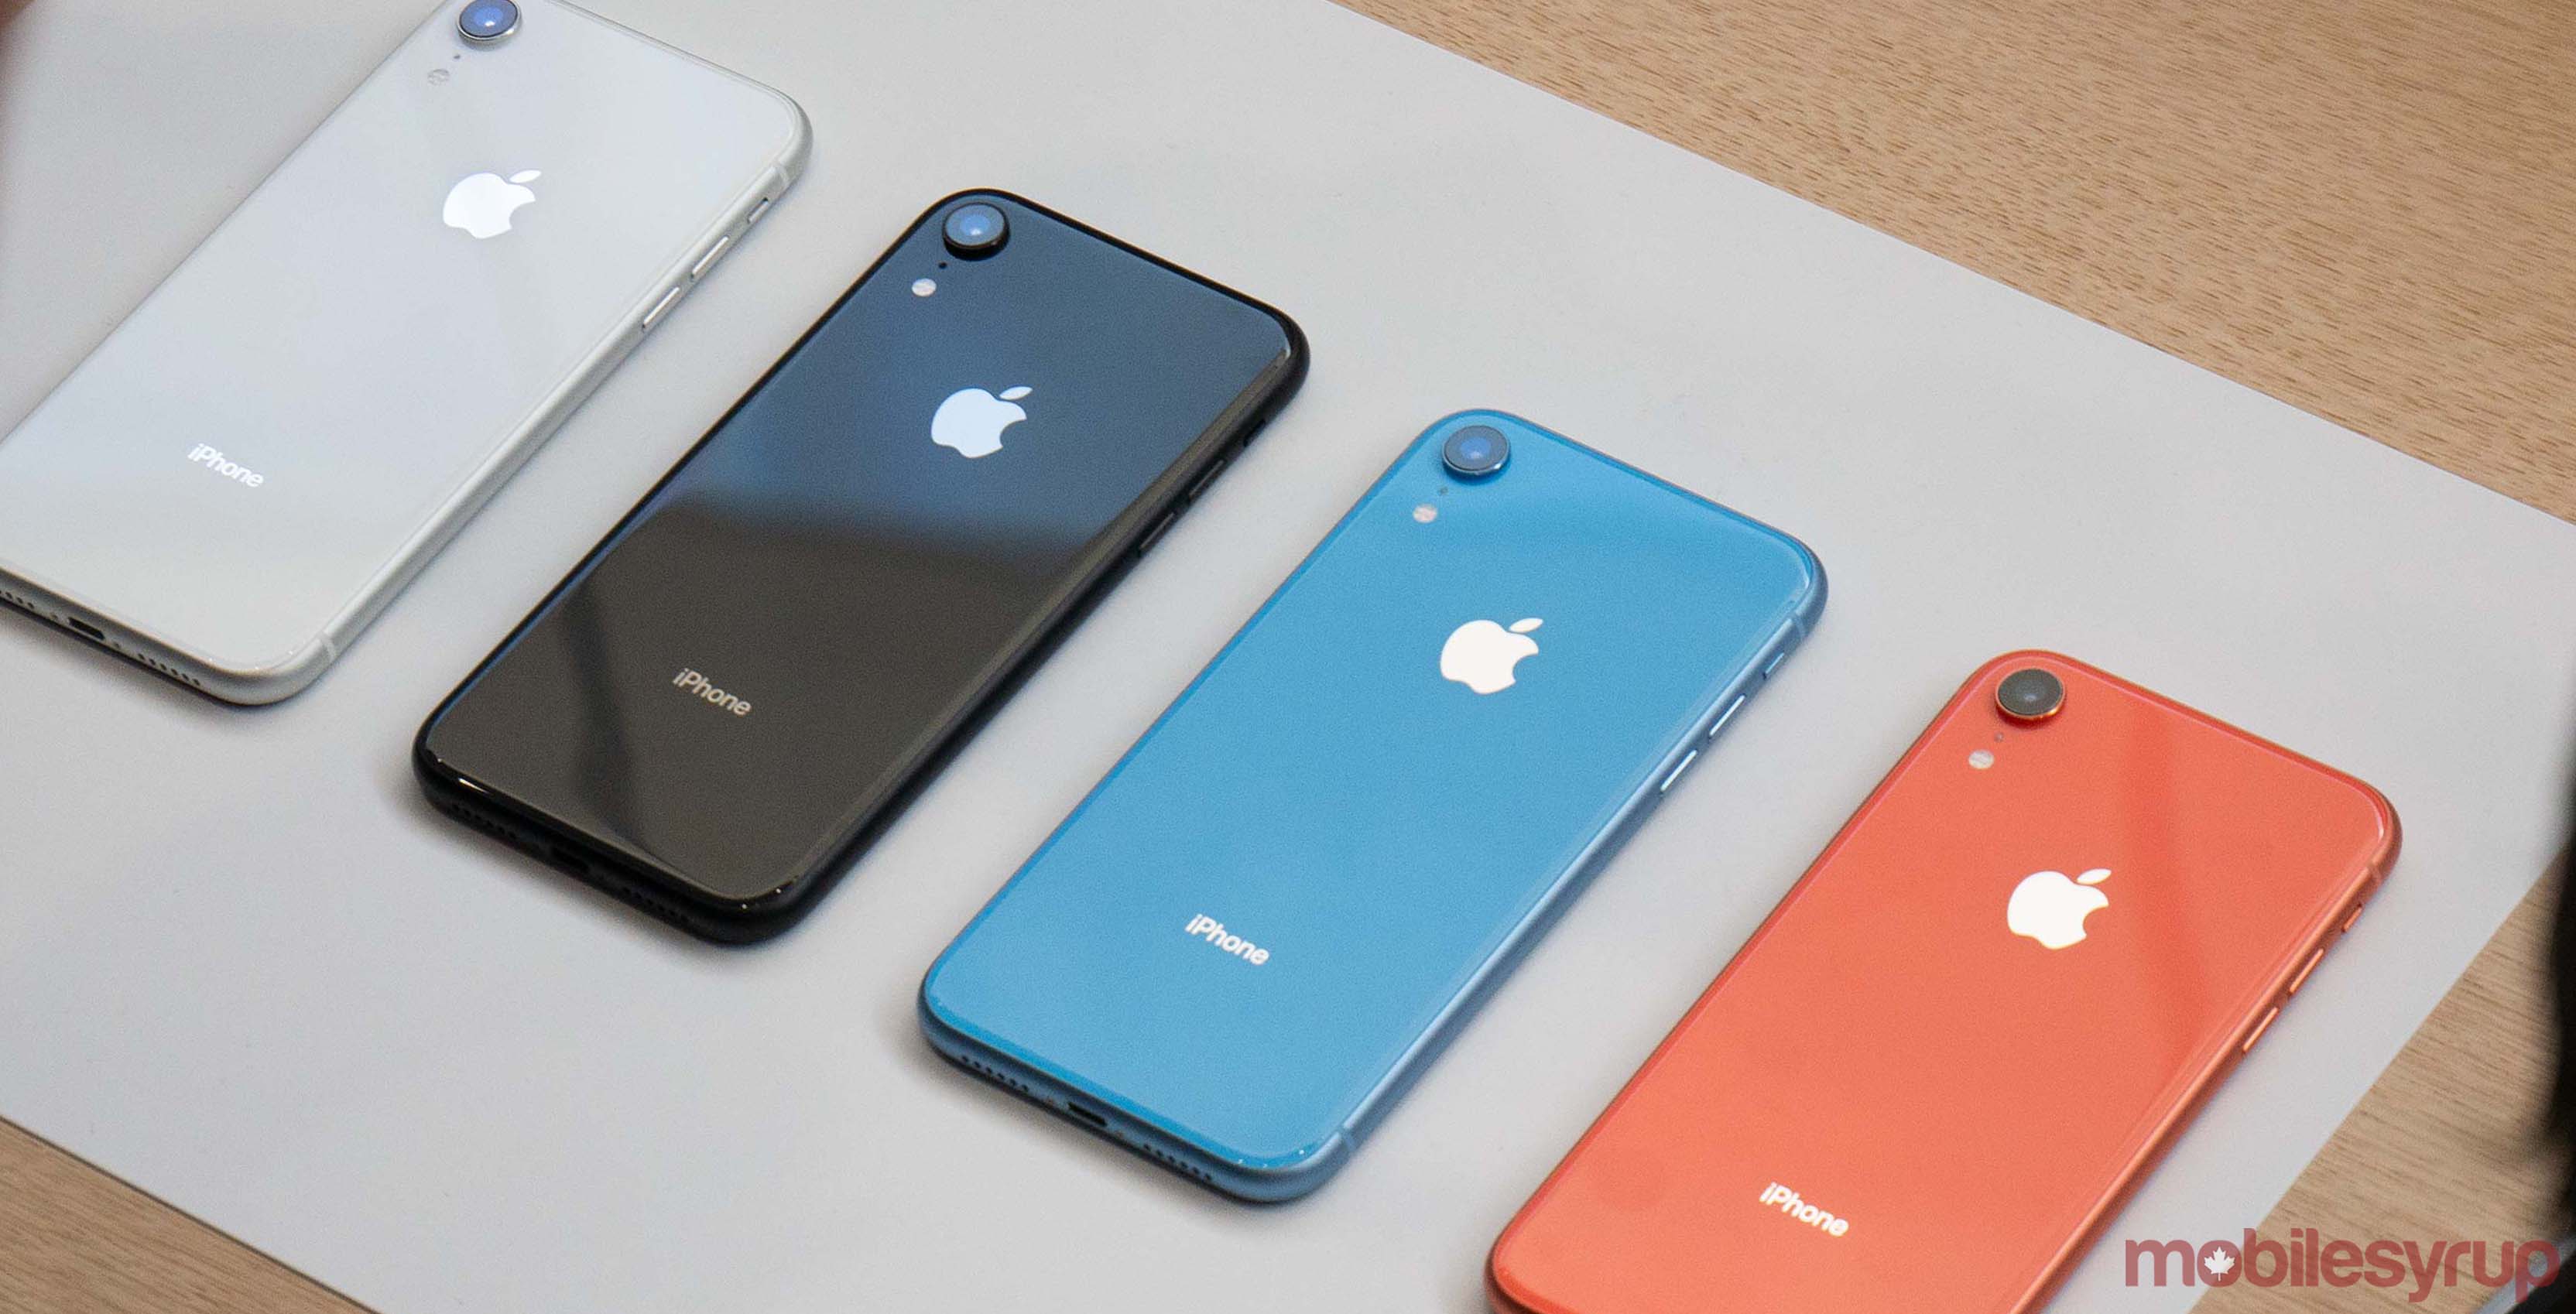 iPhone XR colours